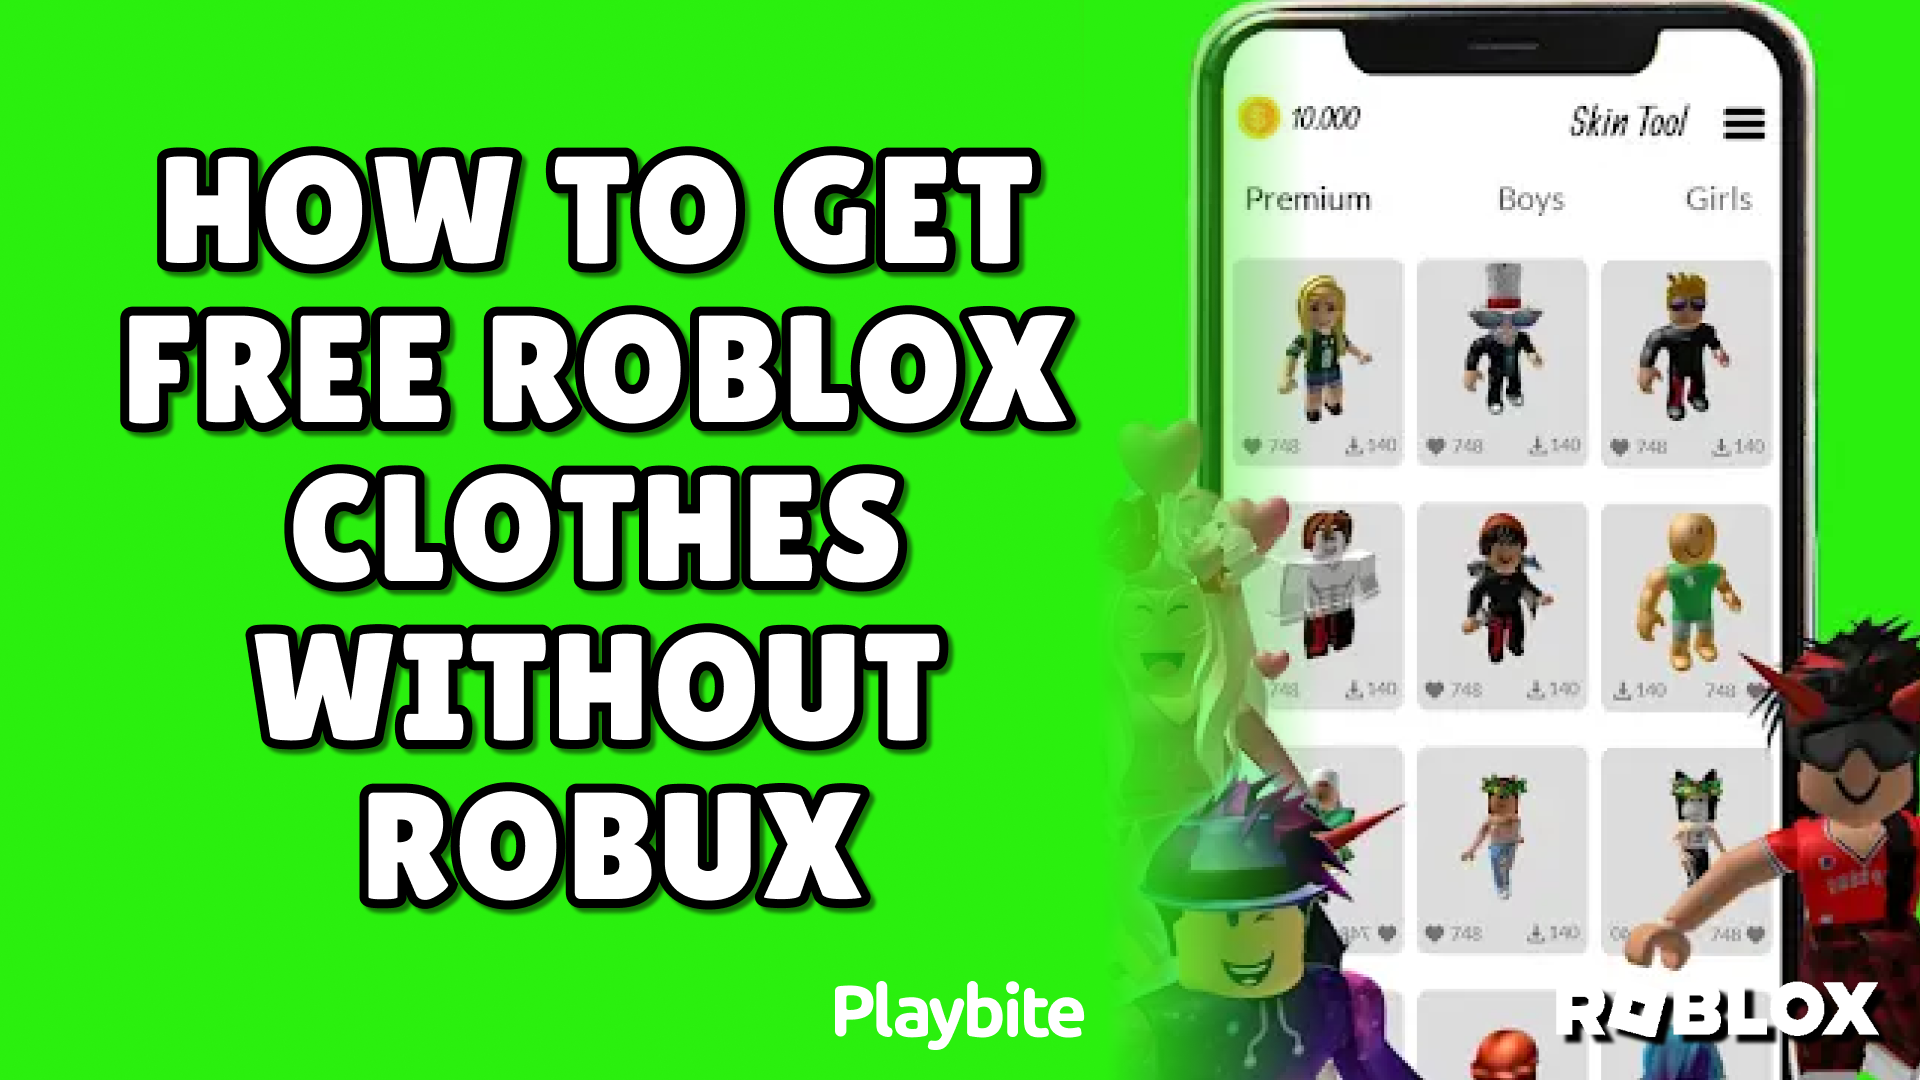 How to Get Free Roblox Clothes Without Robux